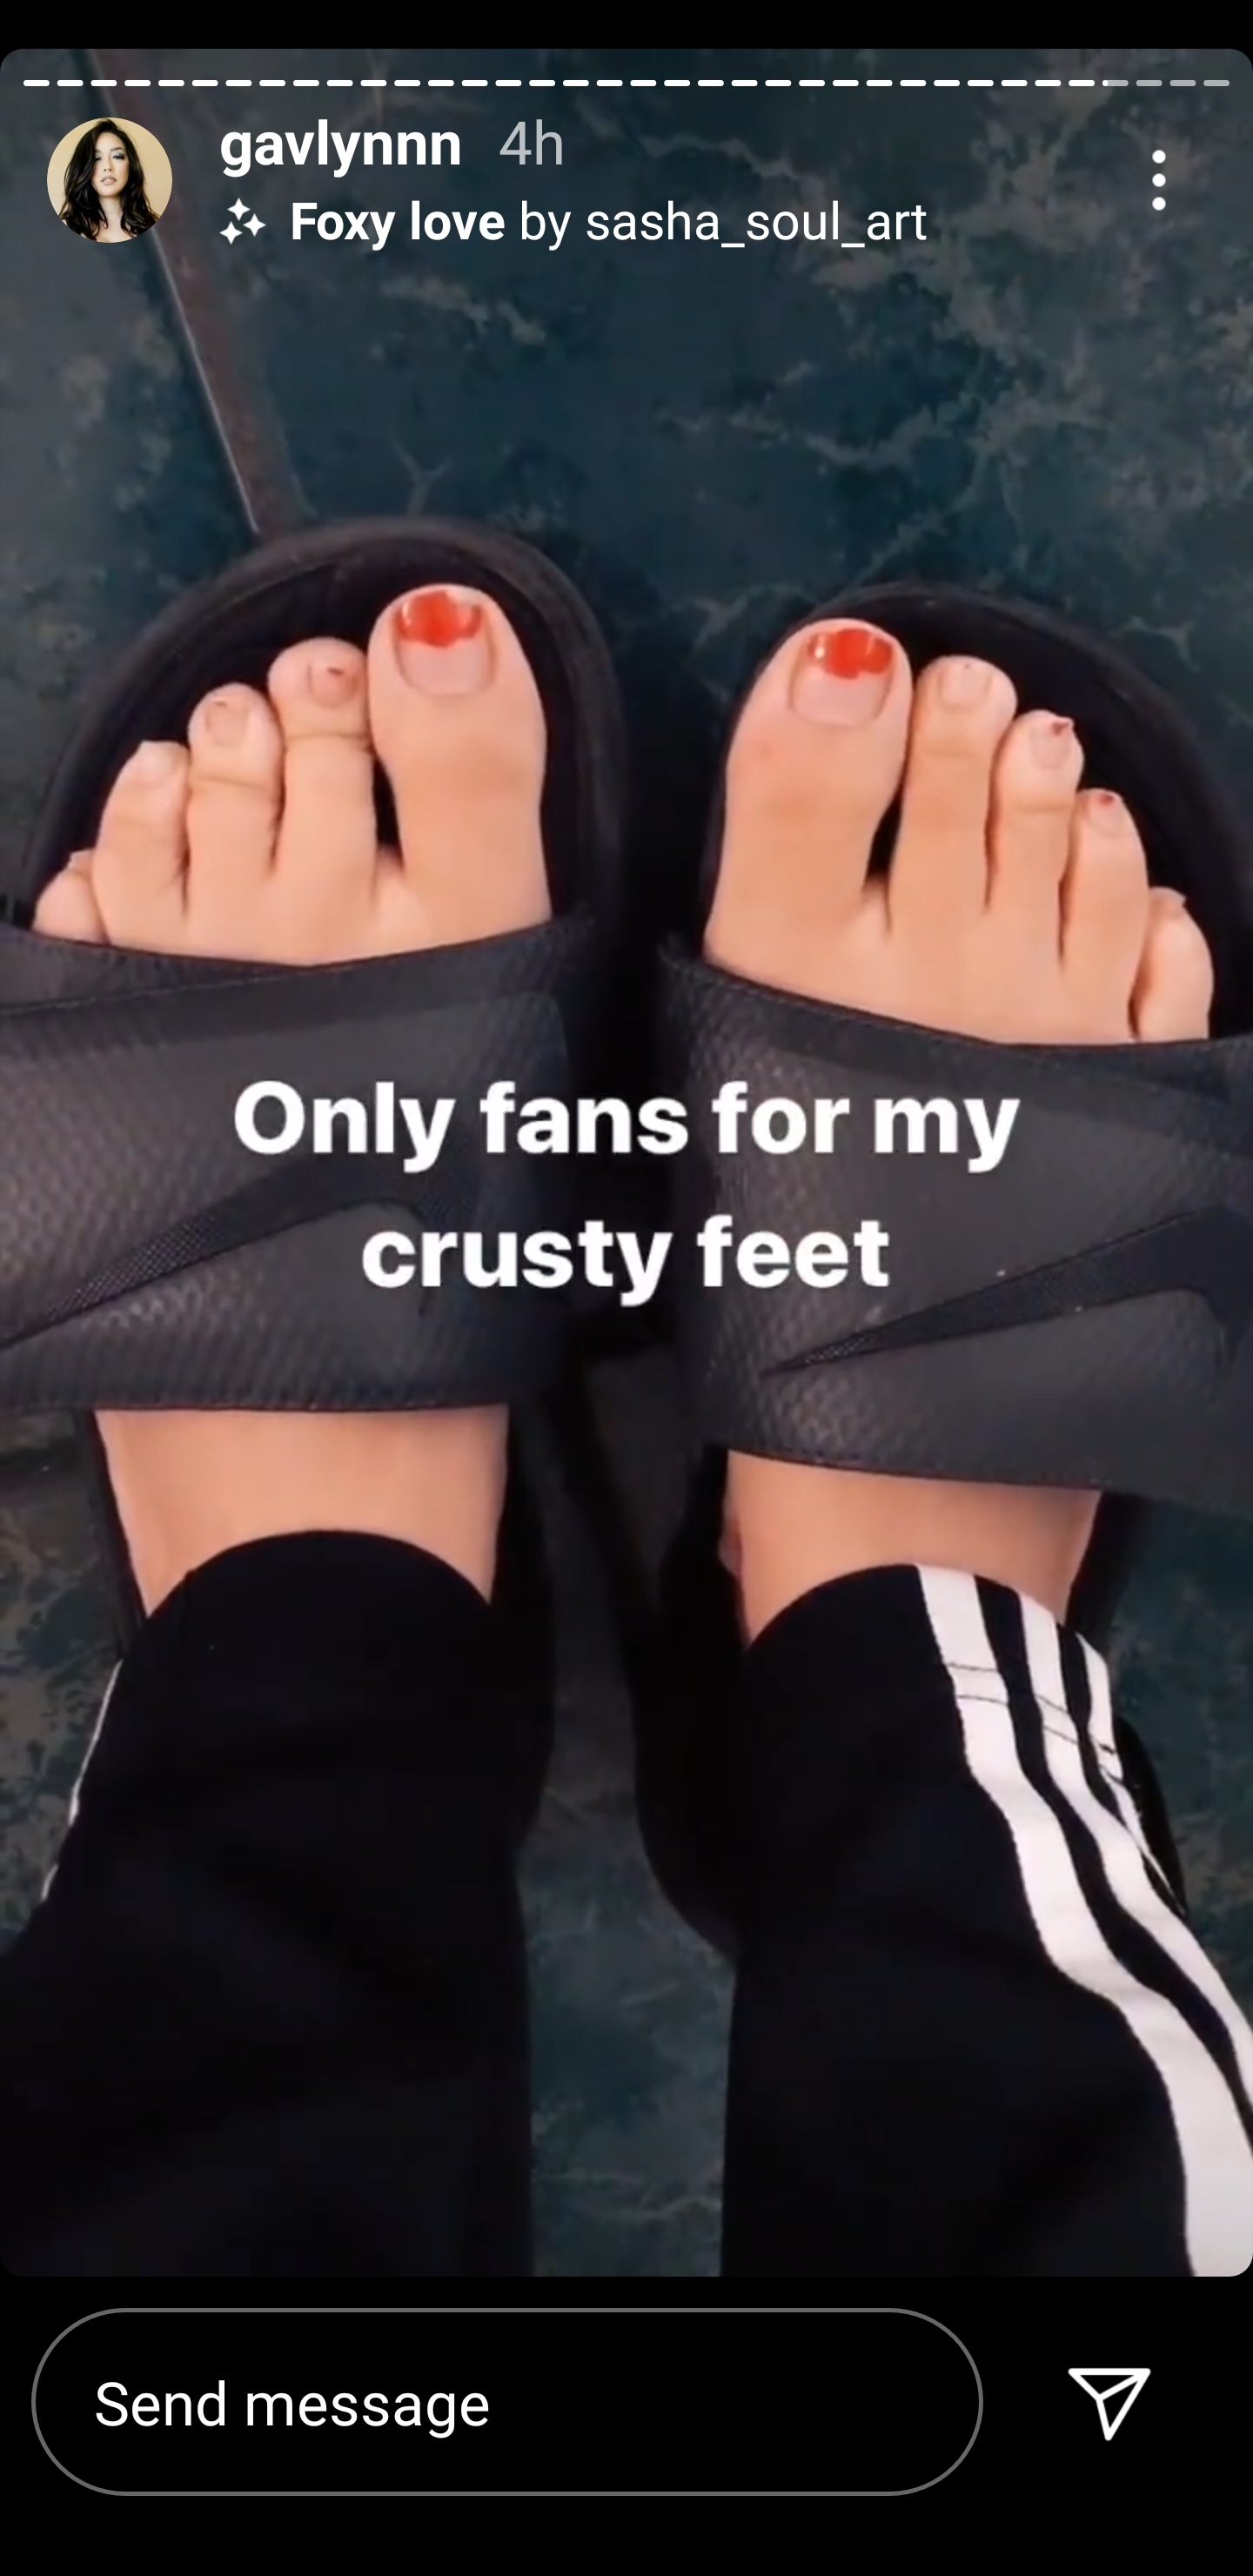 Feet on only fans